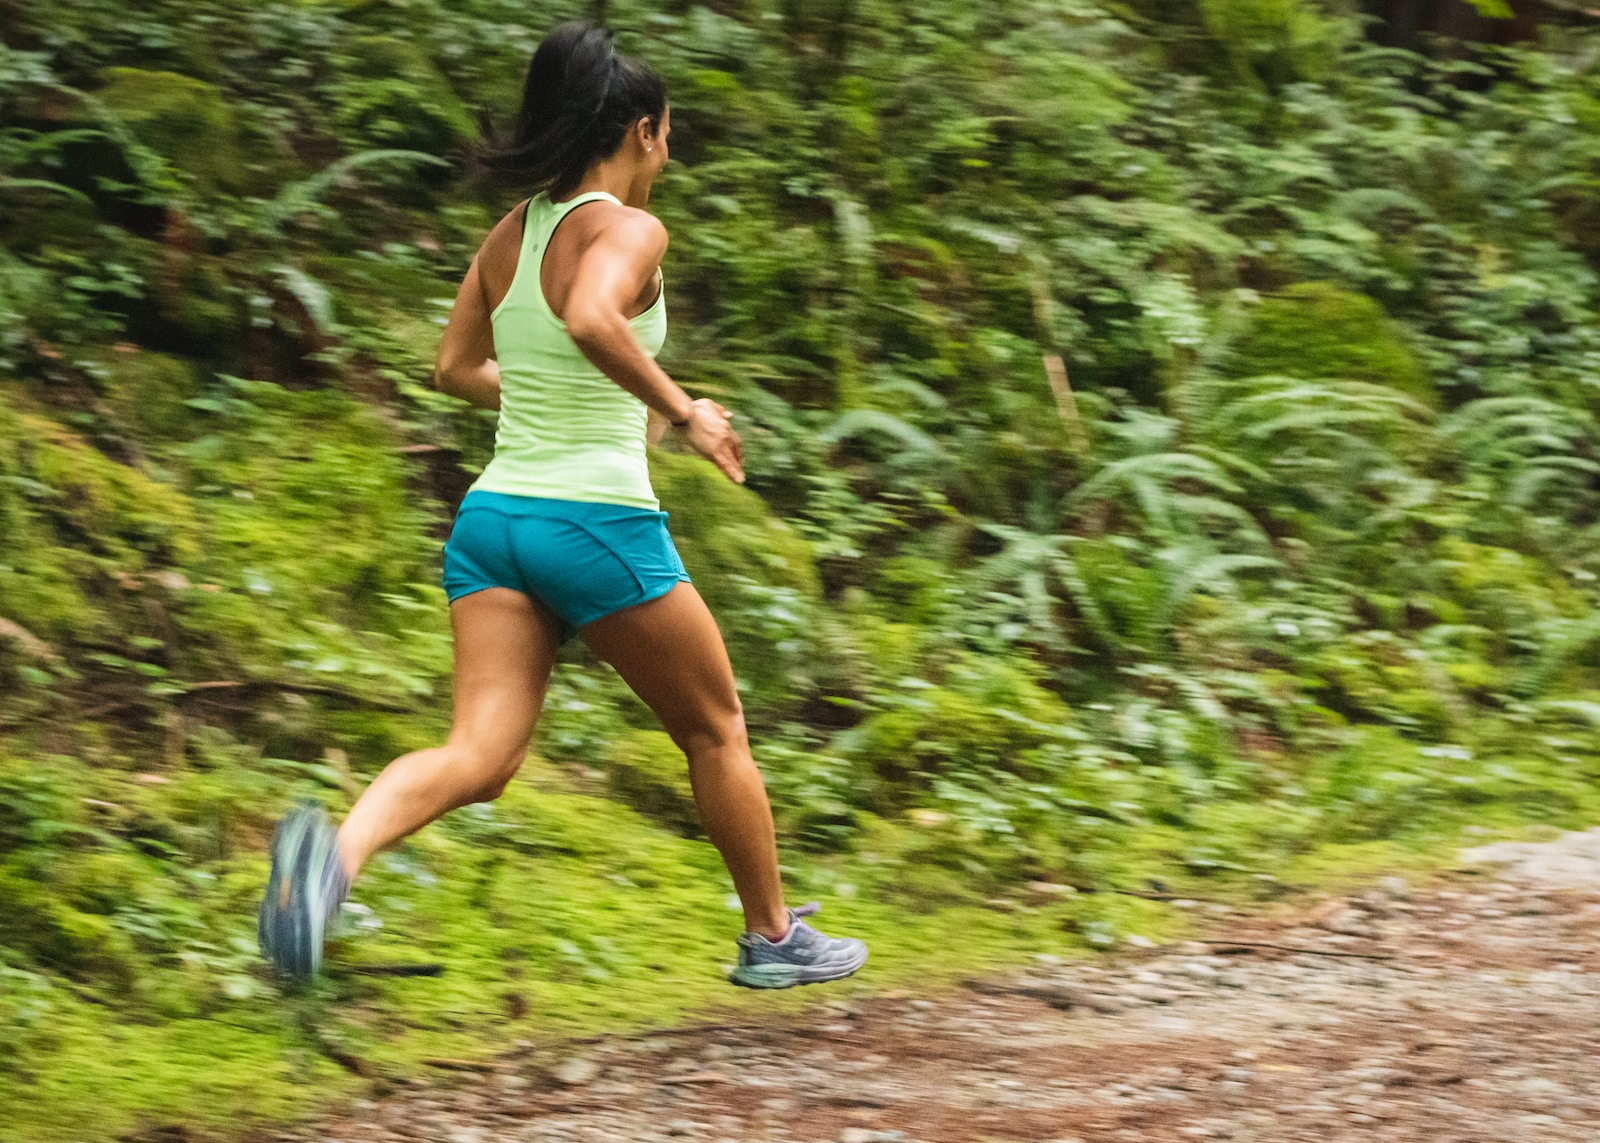 Trail Running for weight loss science behind